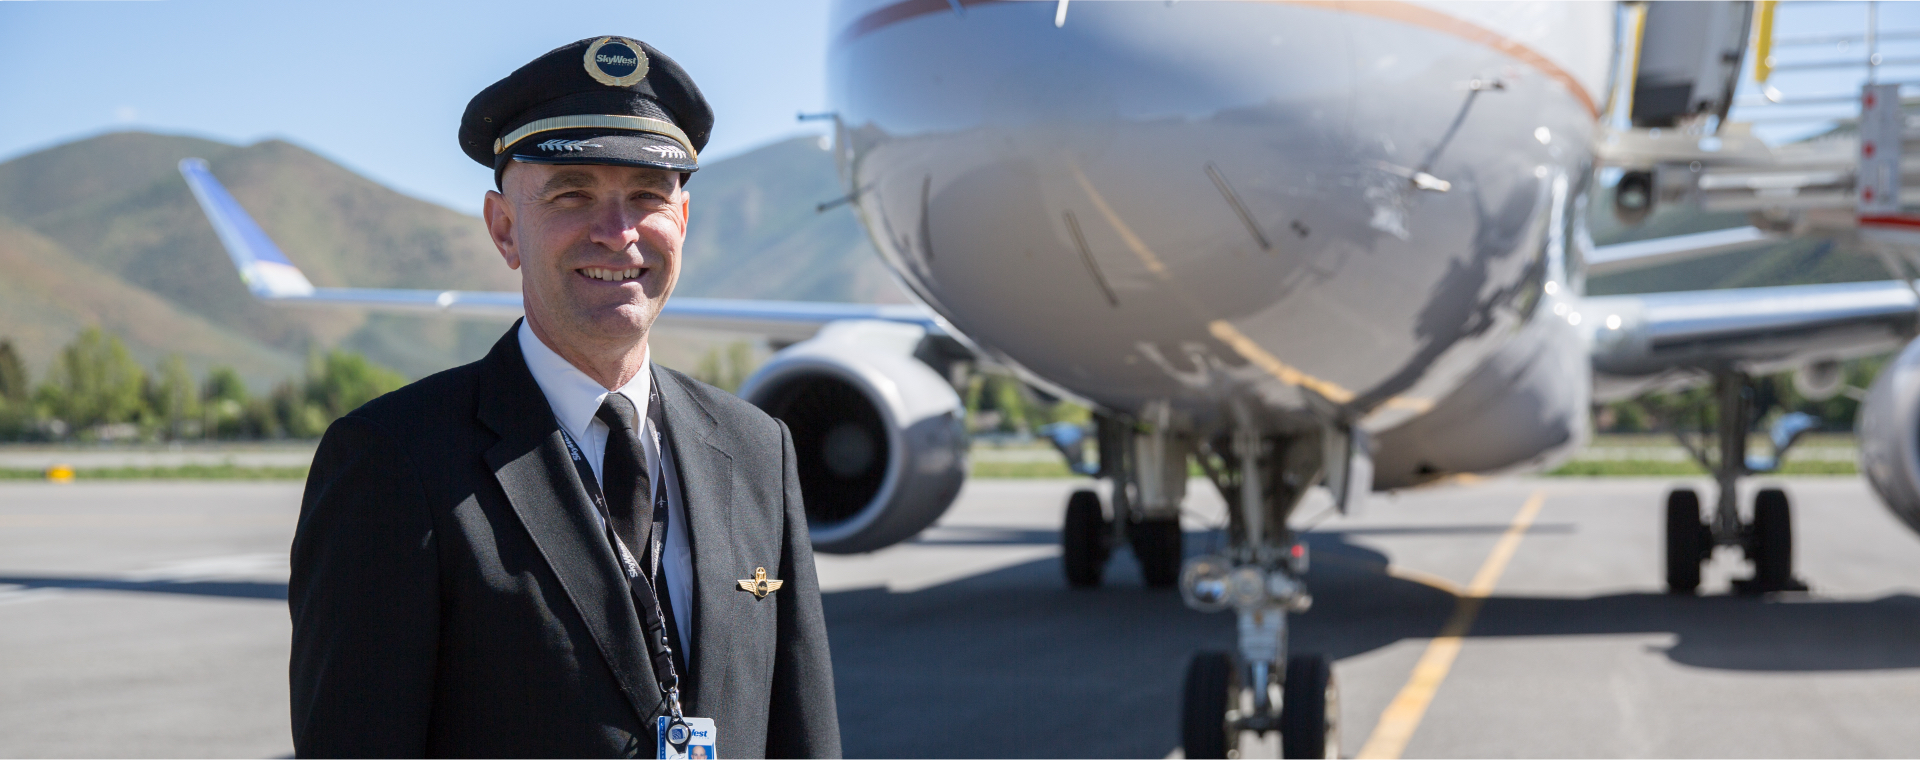 Day in the Life of an Airline Pilot